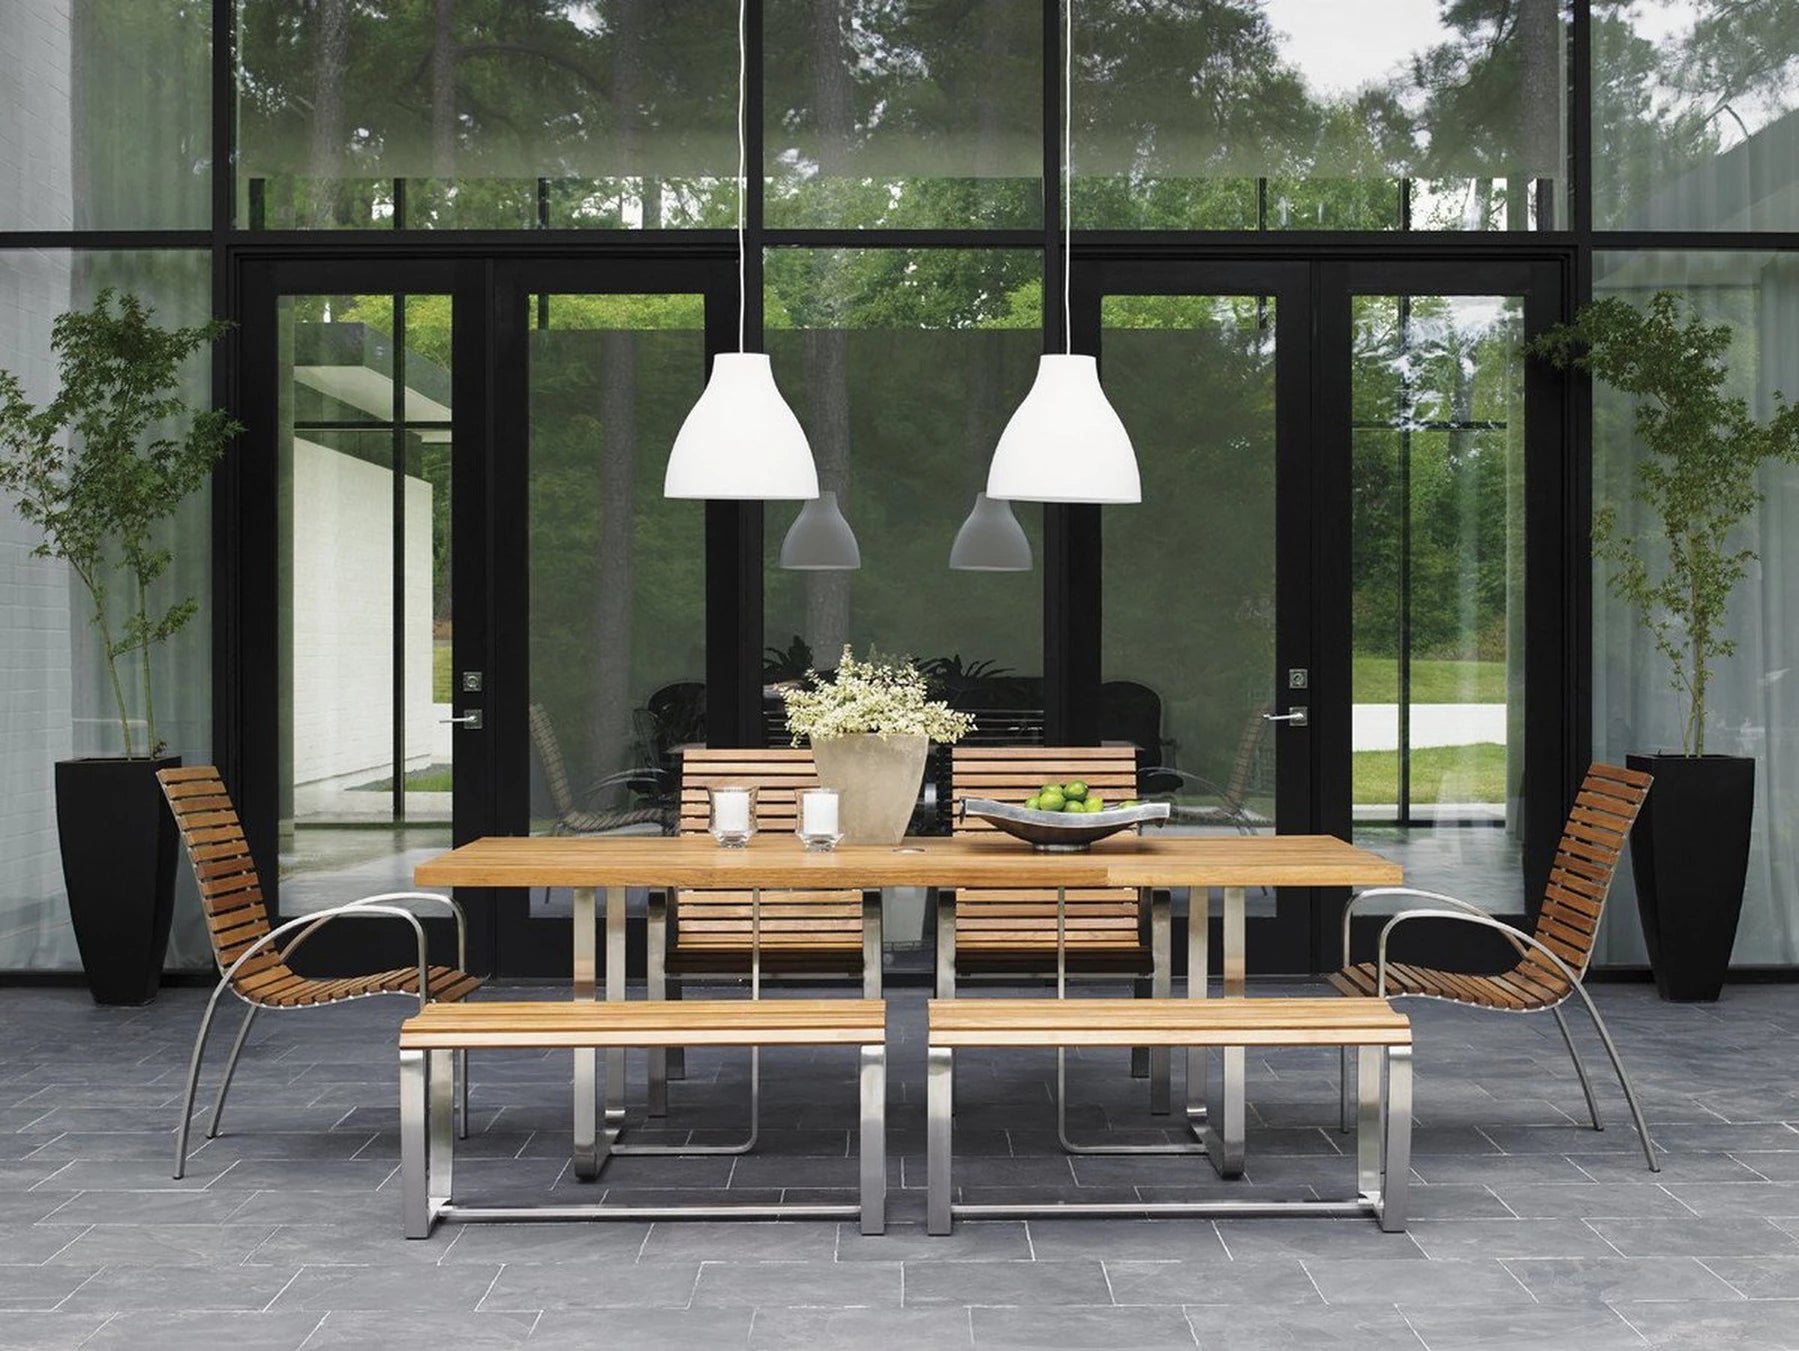 Top 3 Tips For Choosing The Right Outdoor Furniture For Your Home